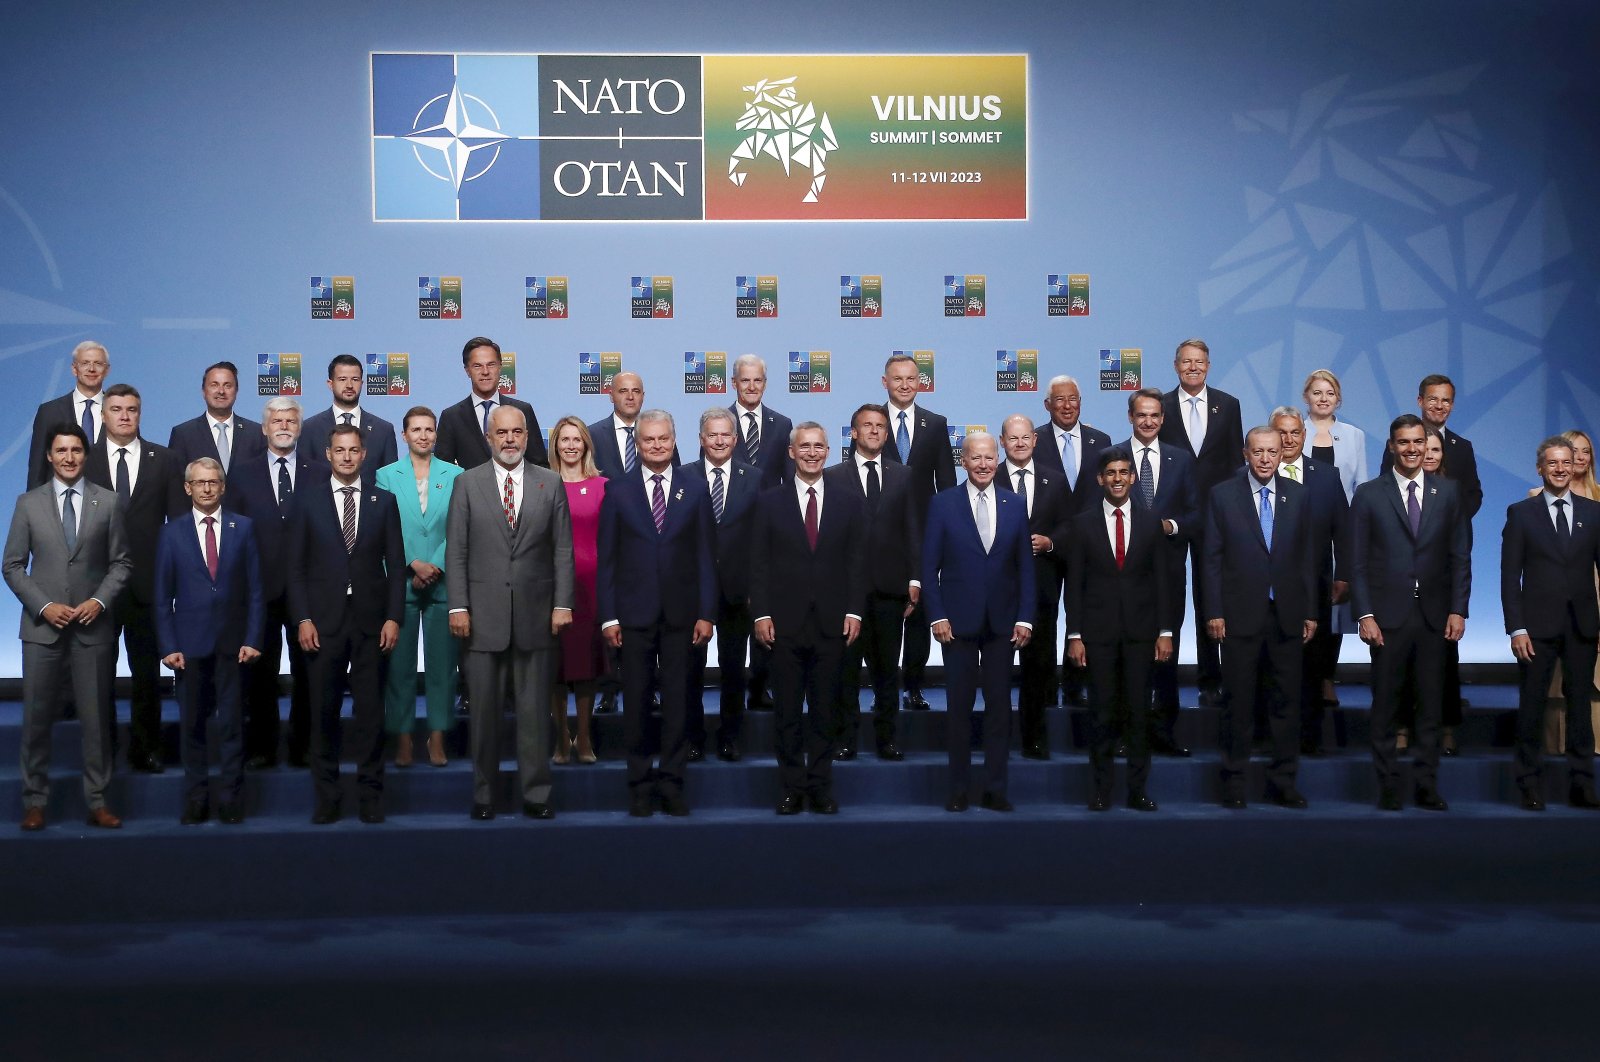 Heads of States and Governments along with NATO Secretary-General Jens Stoltenberg (front row, 6-L) pose for the official group photo at the NATO summit in Vilnius, Lithuania, July 11, 2023. (EPA Photo)